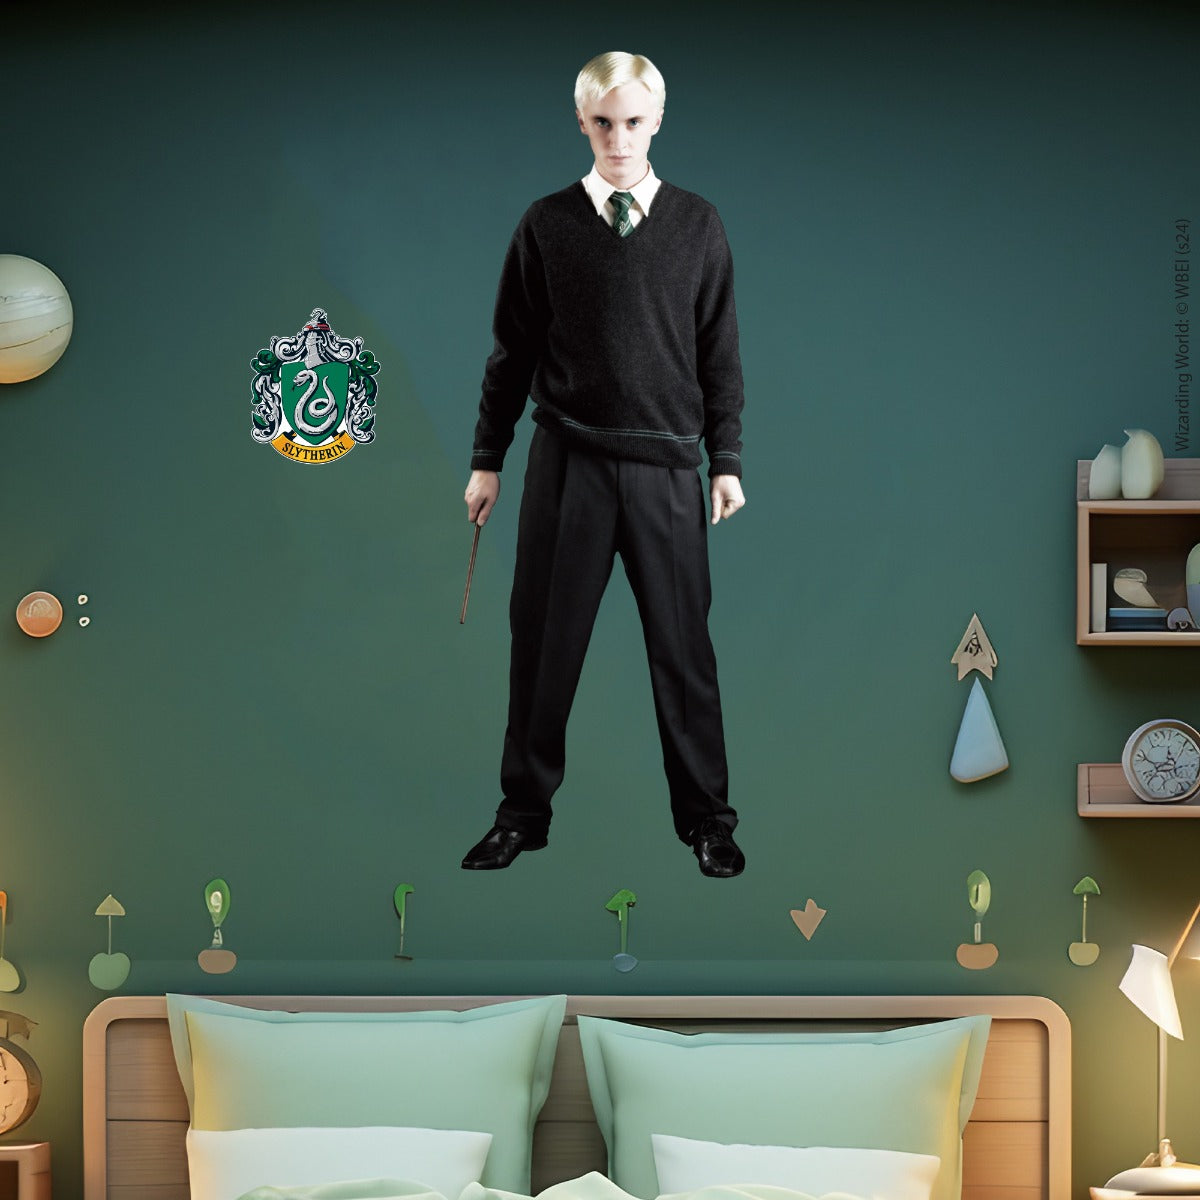 HARRY POTTER Wall Sticker - Draco Malfoy Cut Out Wall Decal Wizarding World Art